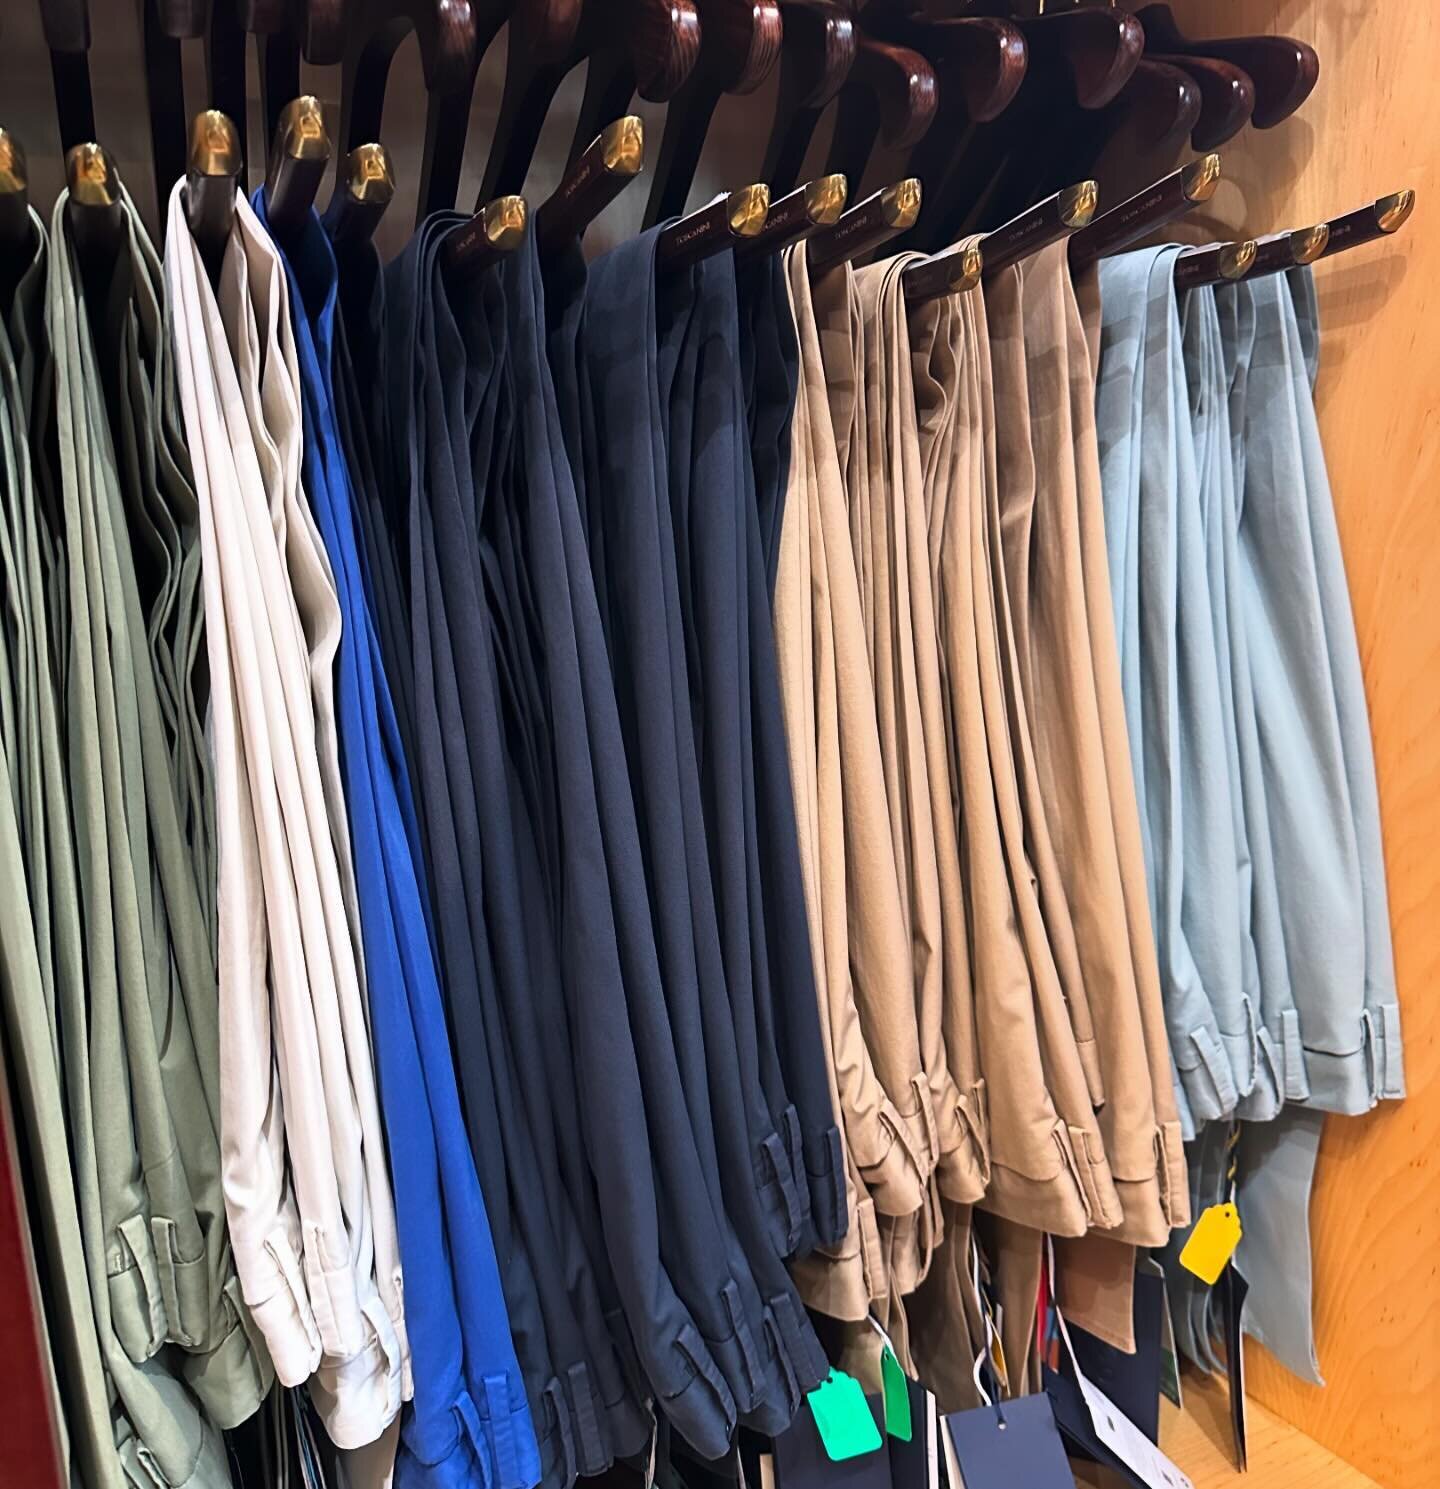 New stock of Chino&rsquo;s by @incotexofficial 
Superb lightweight &lsquo;Royal Batavia&rsquo; Cotton 
Ideal for the warmer months.

#incotex 
#incotexslacks 
#summerchinos
#royalbatavia 
#chinos